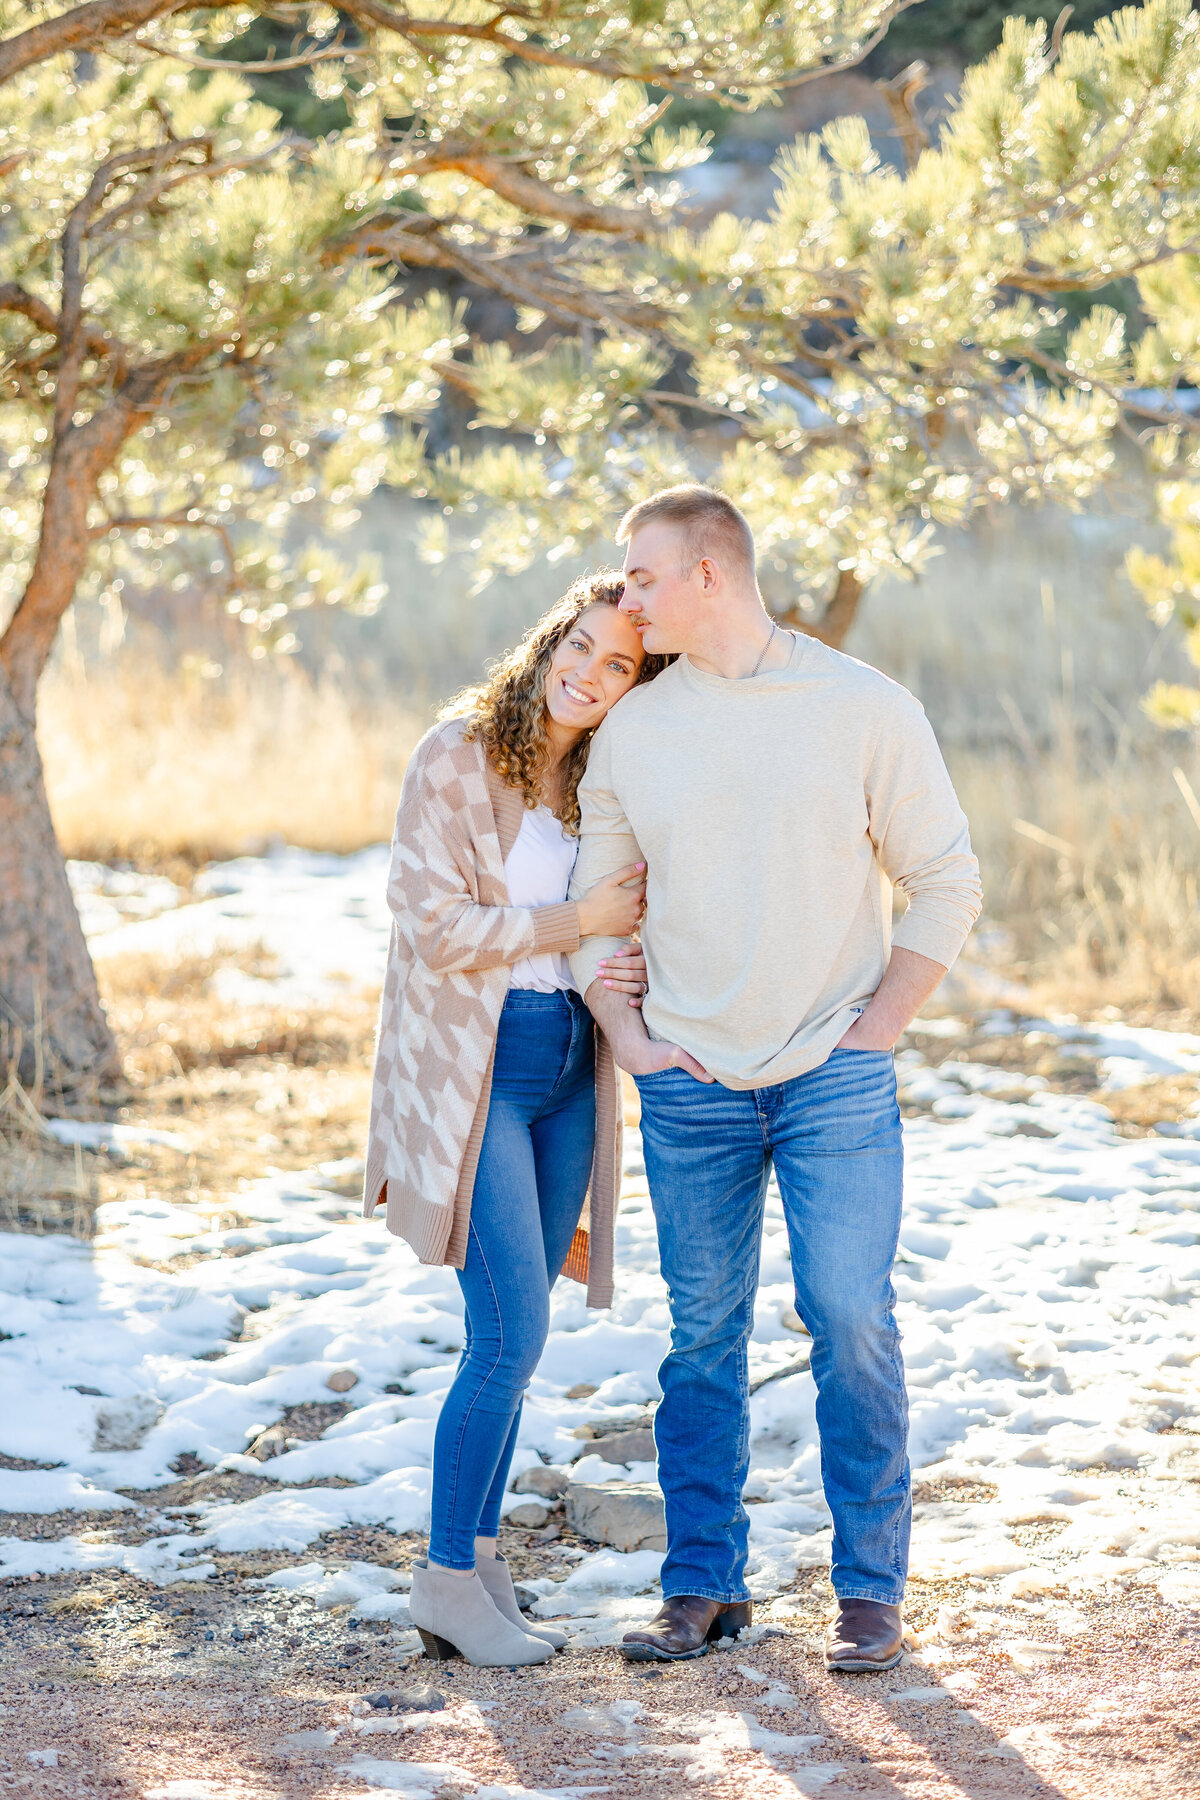 Colorado Springs Engagement Photographer - Couple Standing in snow under a tree.